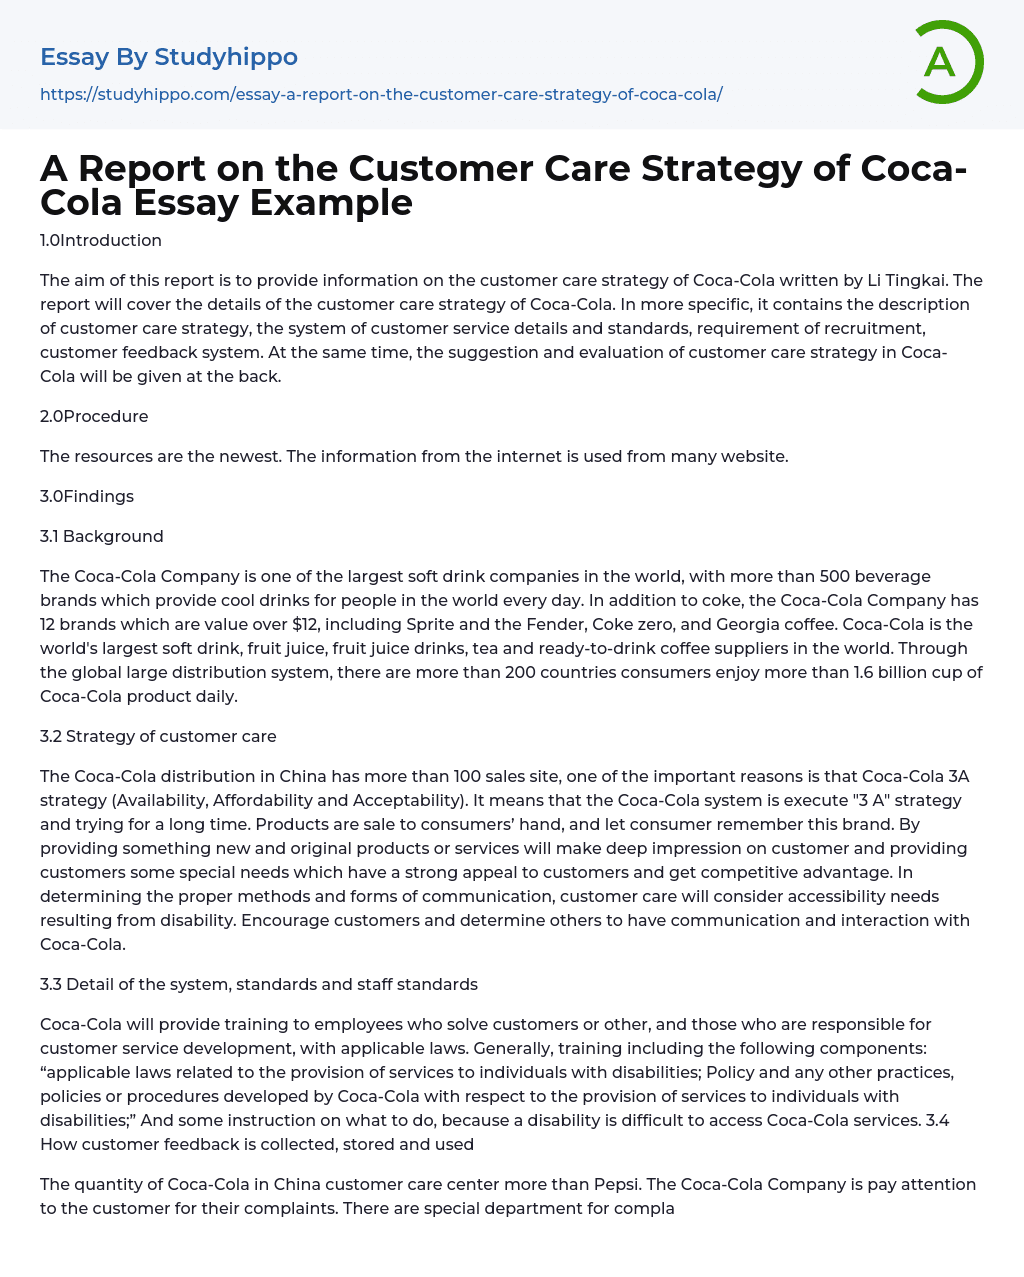 A Report on the Customer Care Strategy of Coca-Cola Essay Example